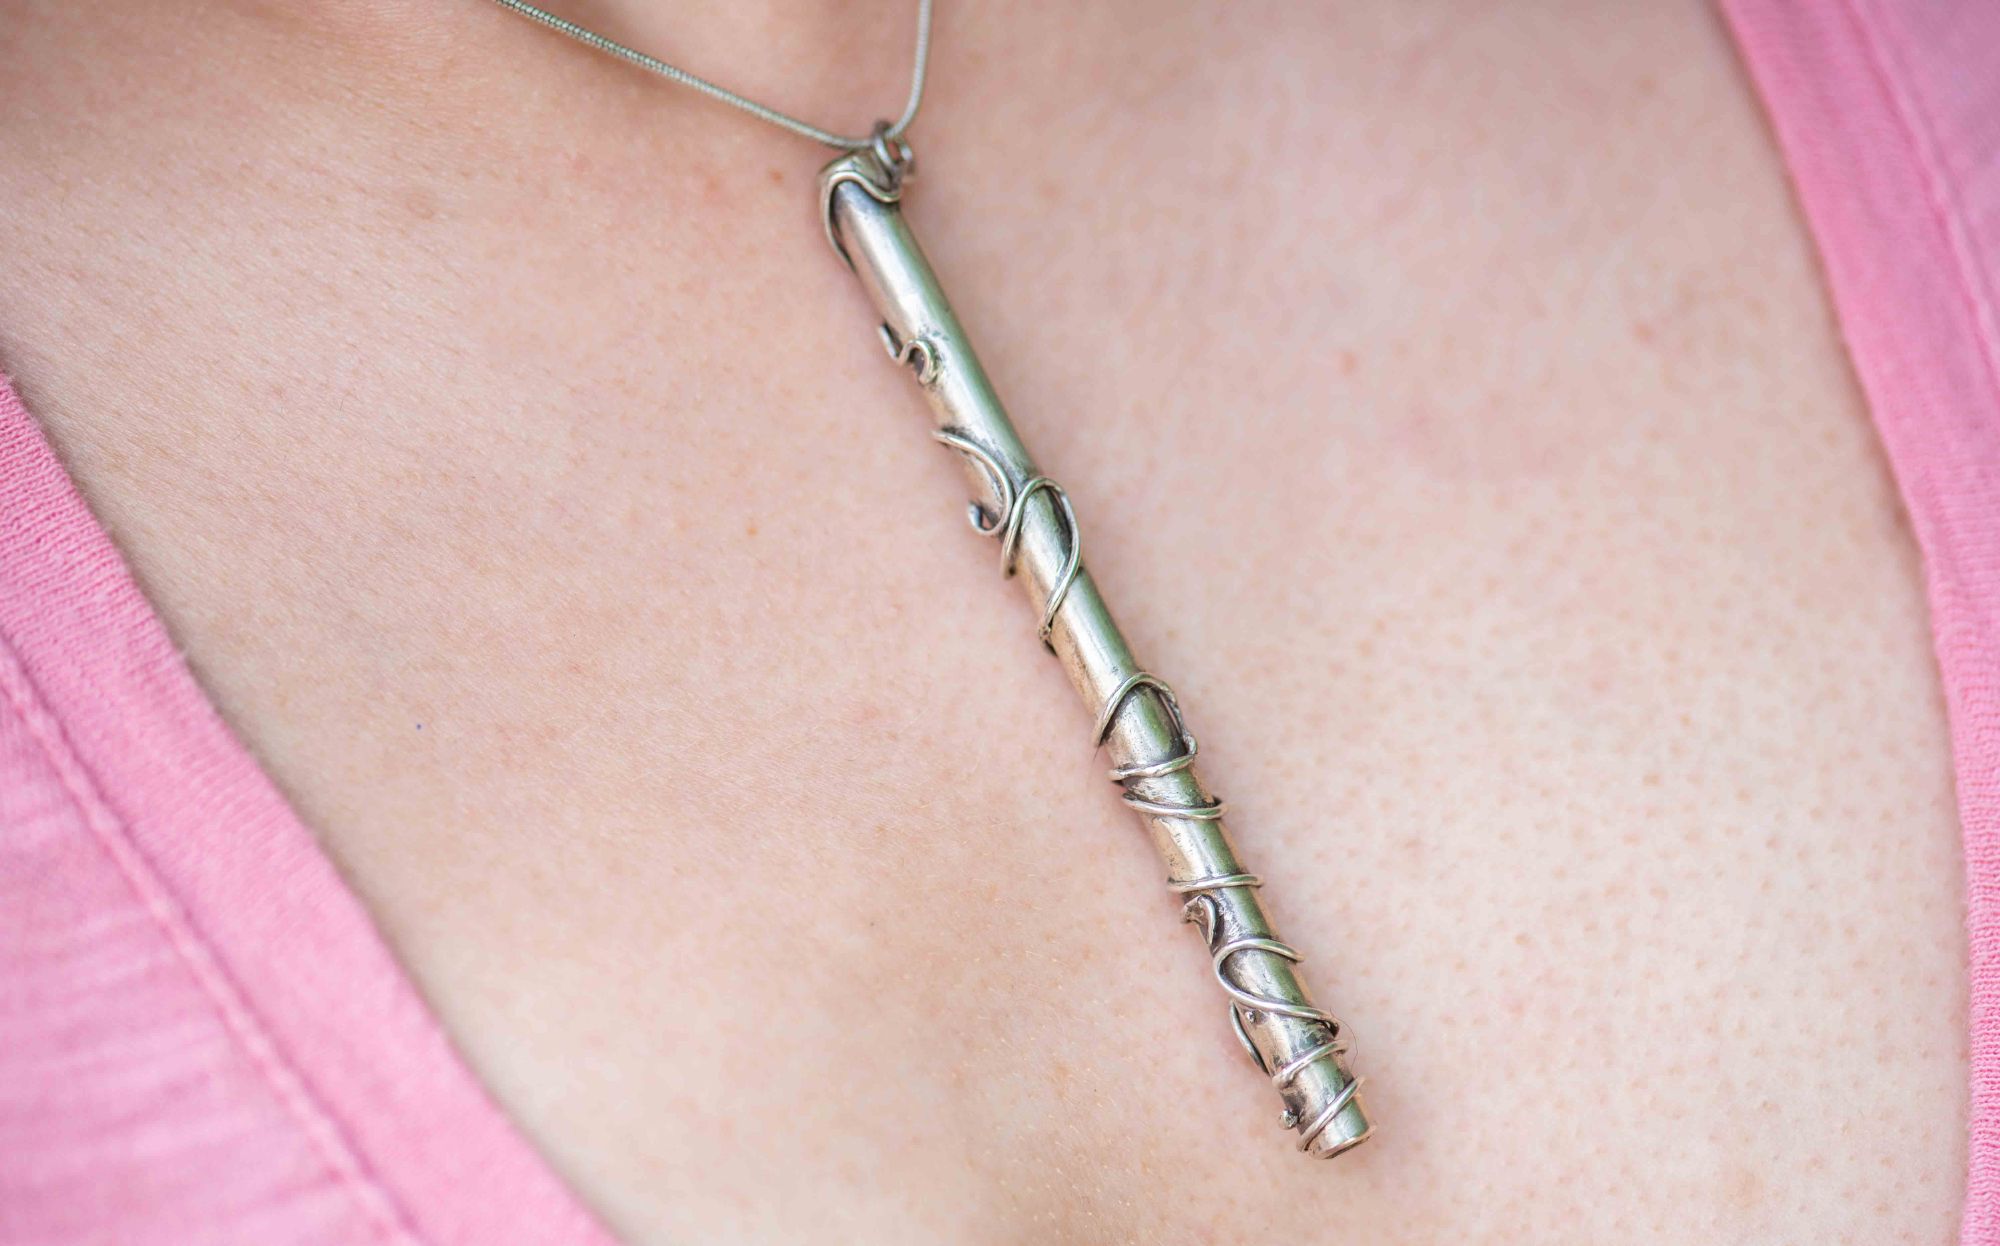 Silver Magic Wand Necklace with Swirled Design